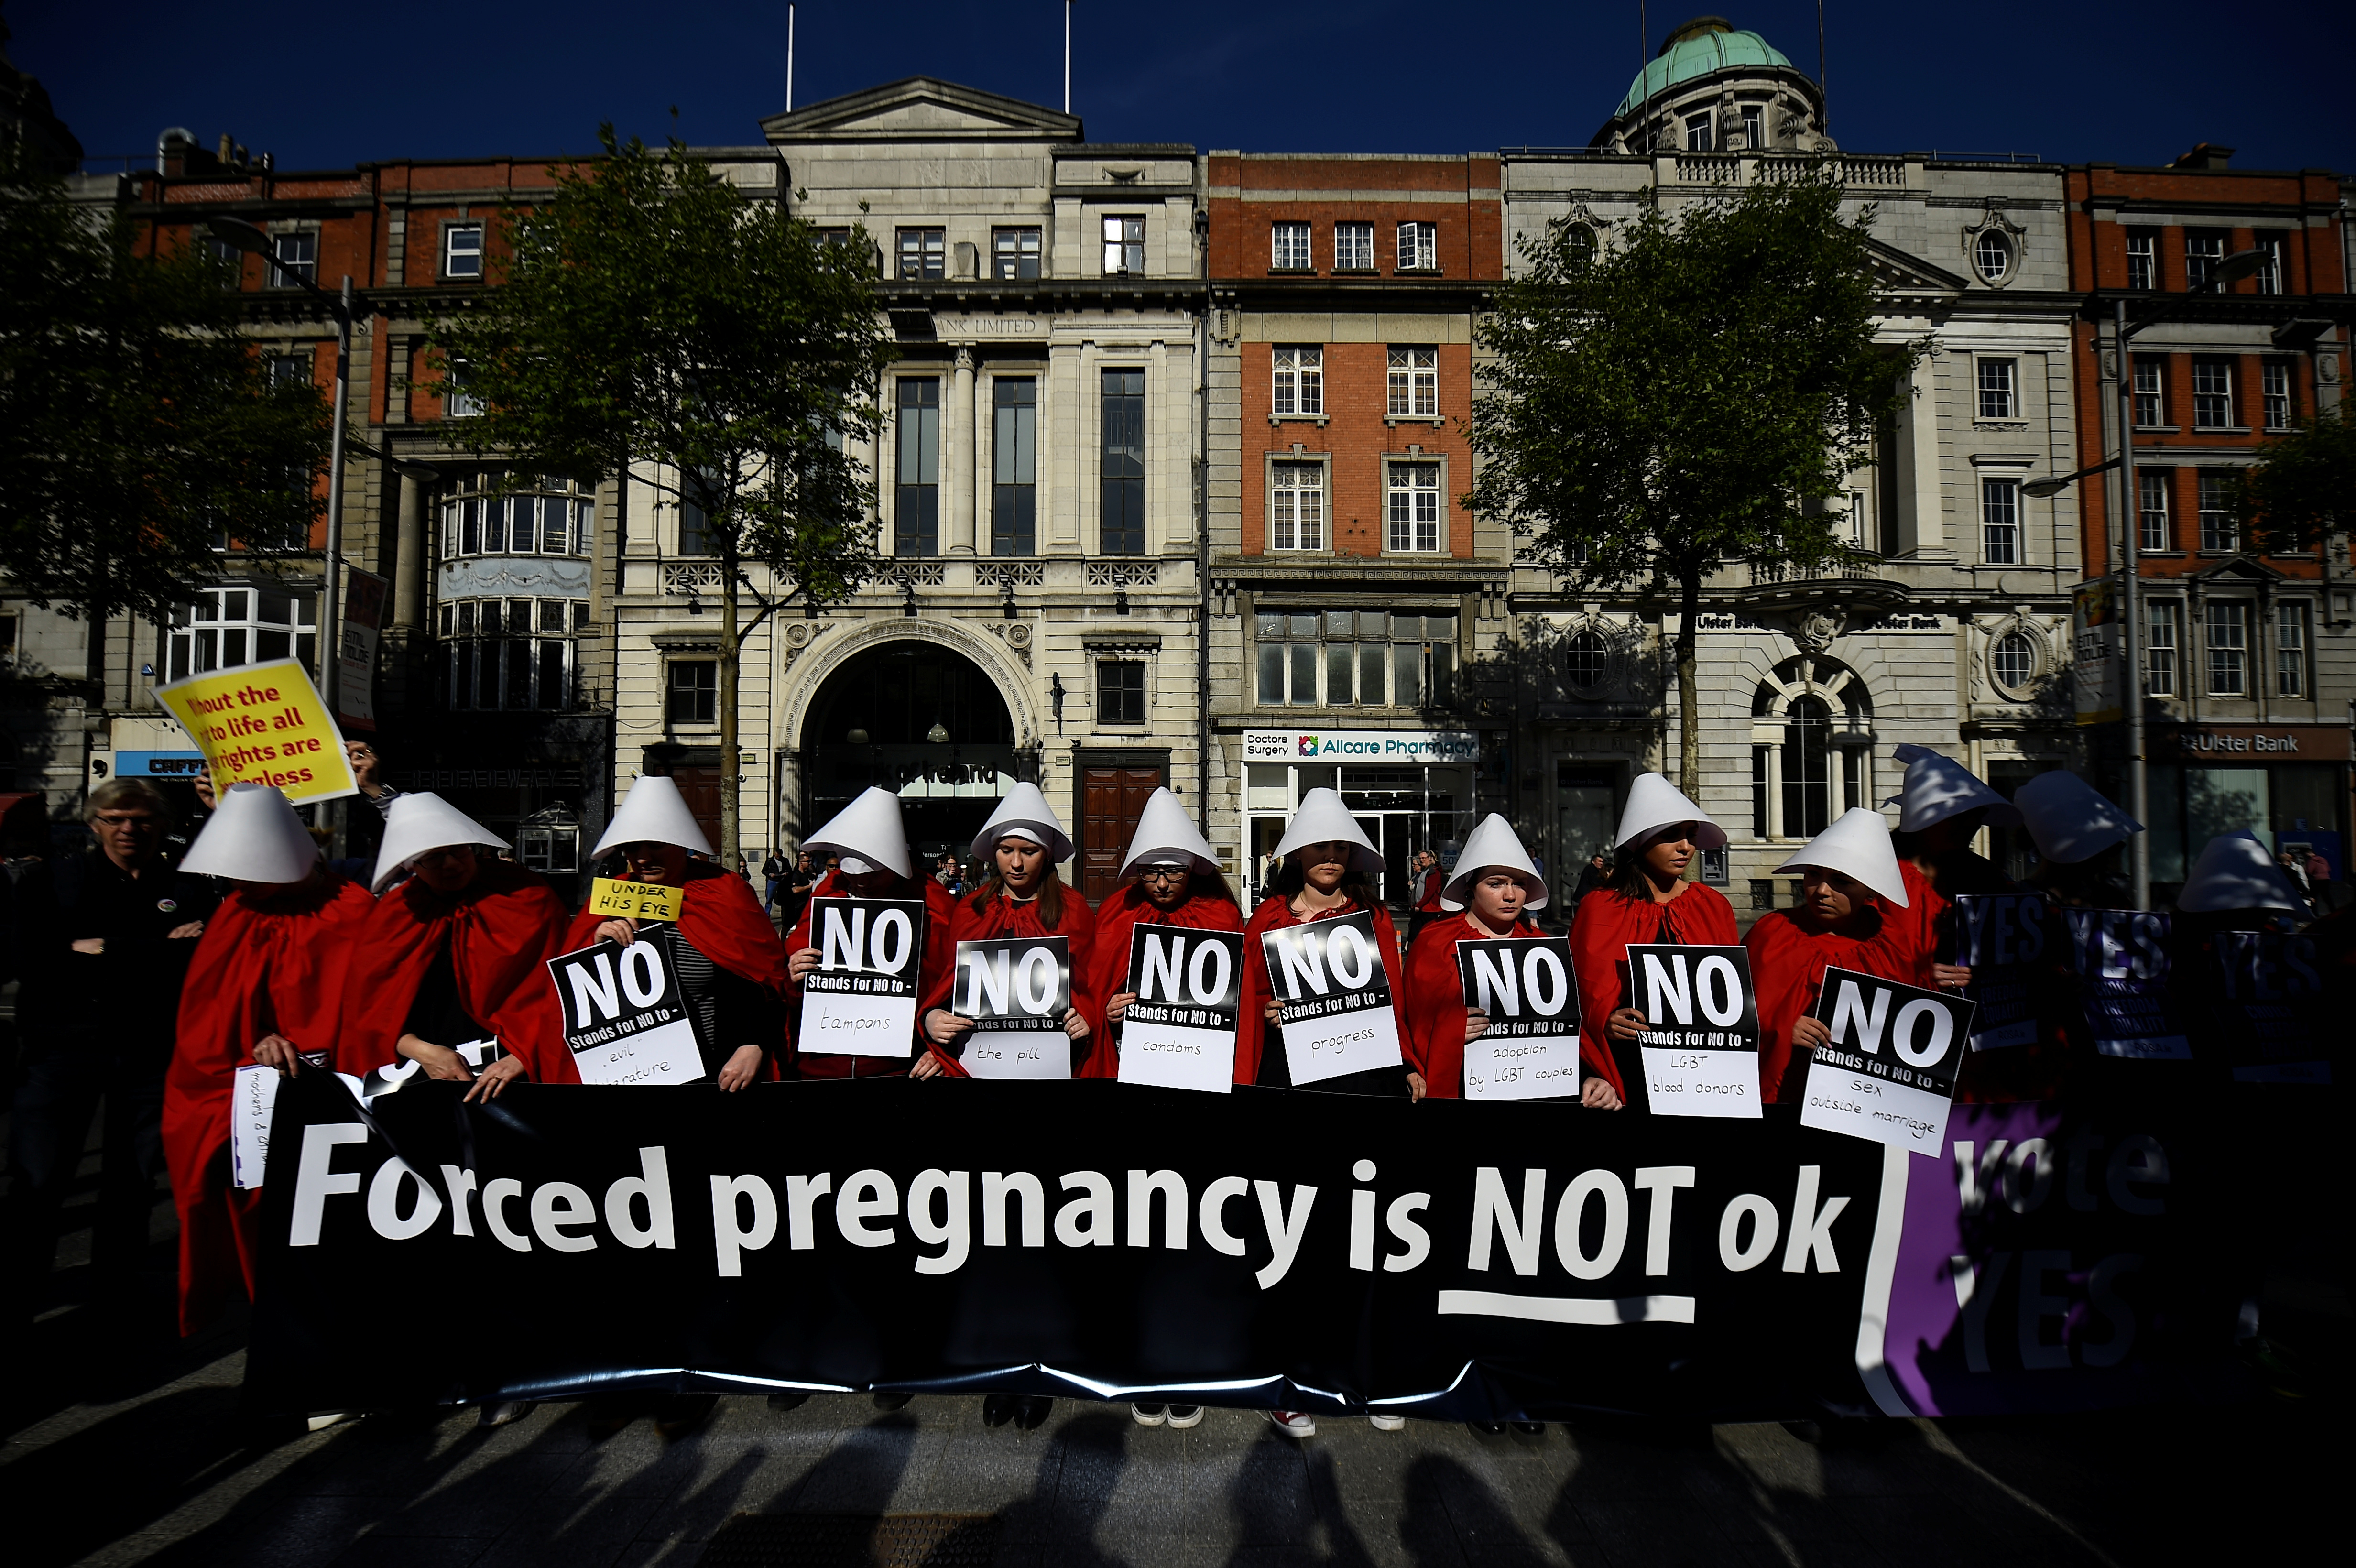 Pro-Choice activists dress up as characters from the Handmaid's Tale in a City centre demonstration ahead of a May 25 referendum on abortion law, in Dublin, Ireland May 23, 2018. REUTERS/Clodagh Kilcoyne - RC1E13084410